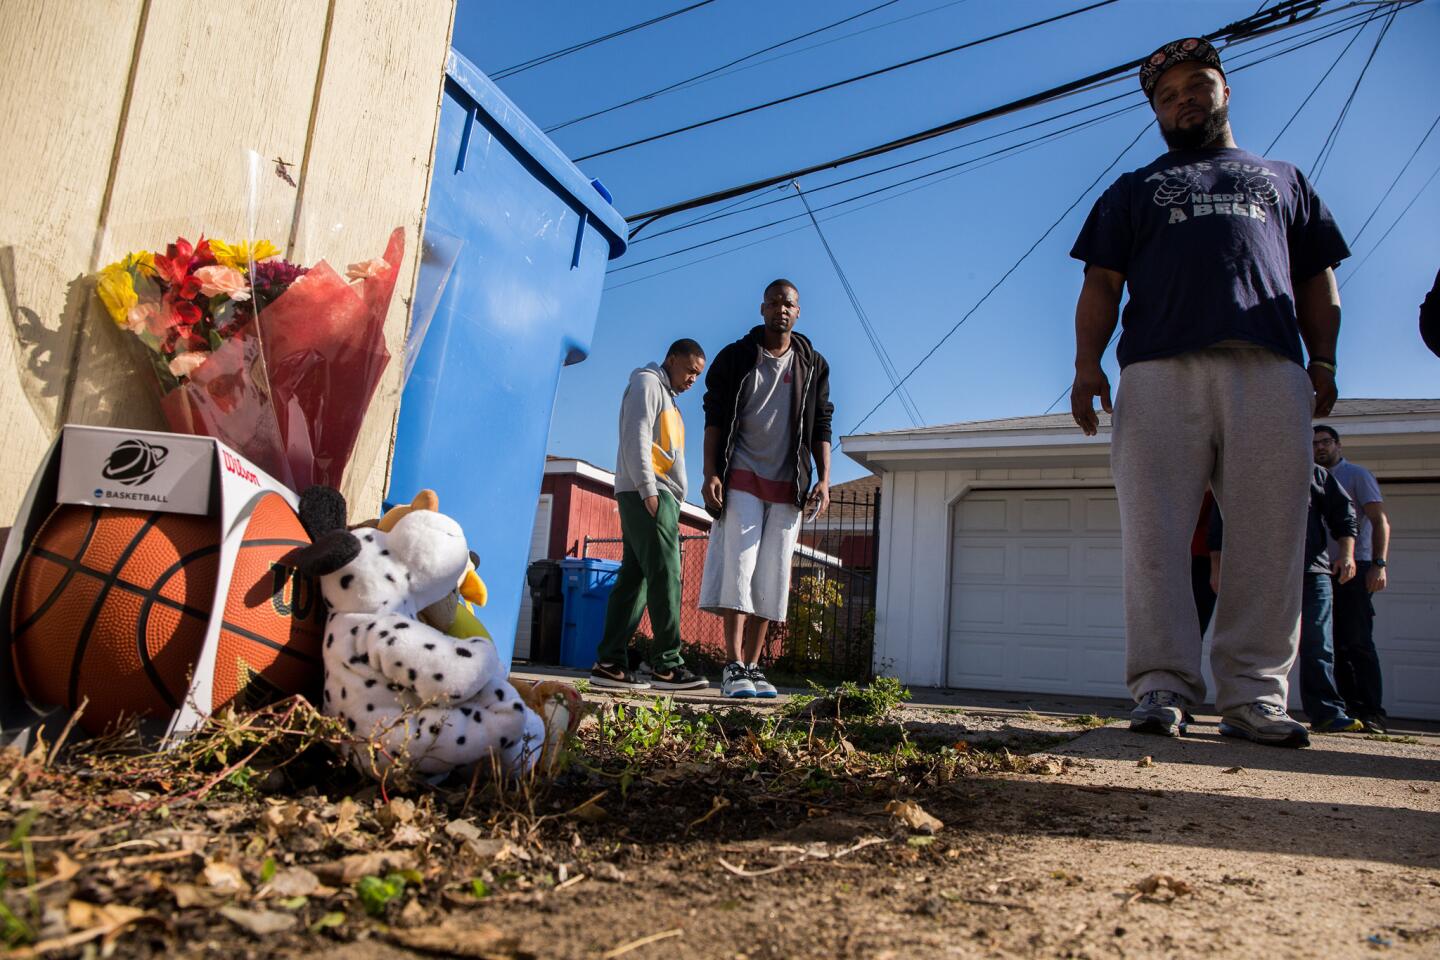 David Lee, 23, left, Antwan Burns-Jones, 31, and William Moore, 35, are among the neighbors who brought items Nov. 3, 2015, to remember Tyshawn Lee, 9, who was fatally shot in Chicago's Gresham neighborhood the day before.